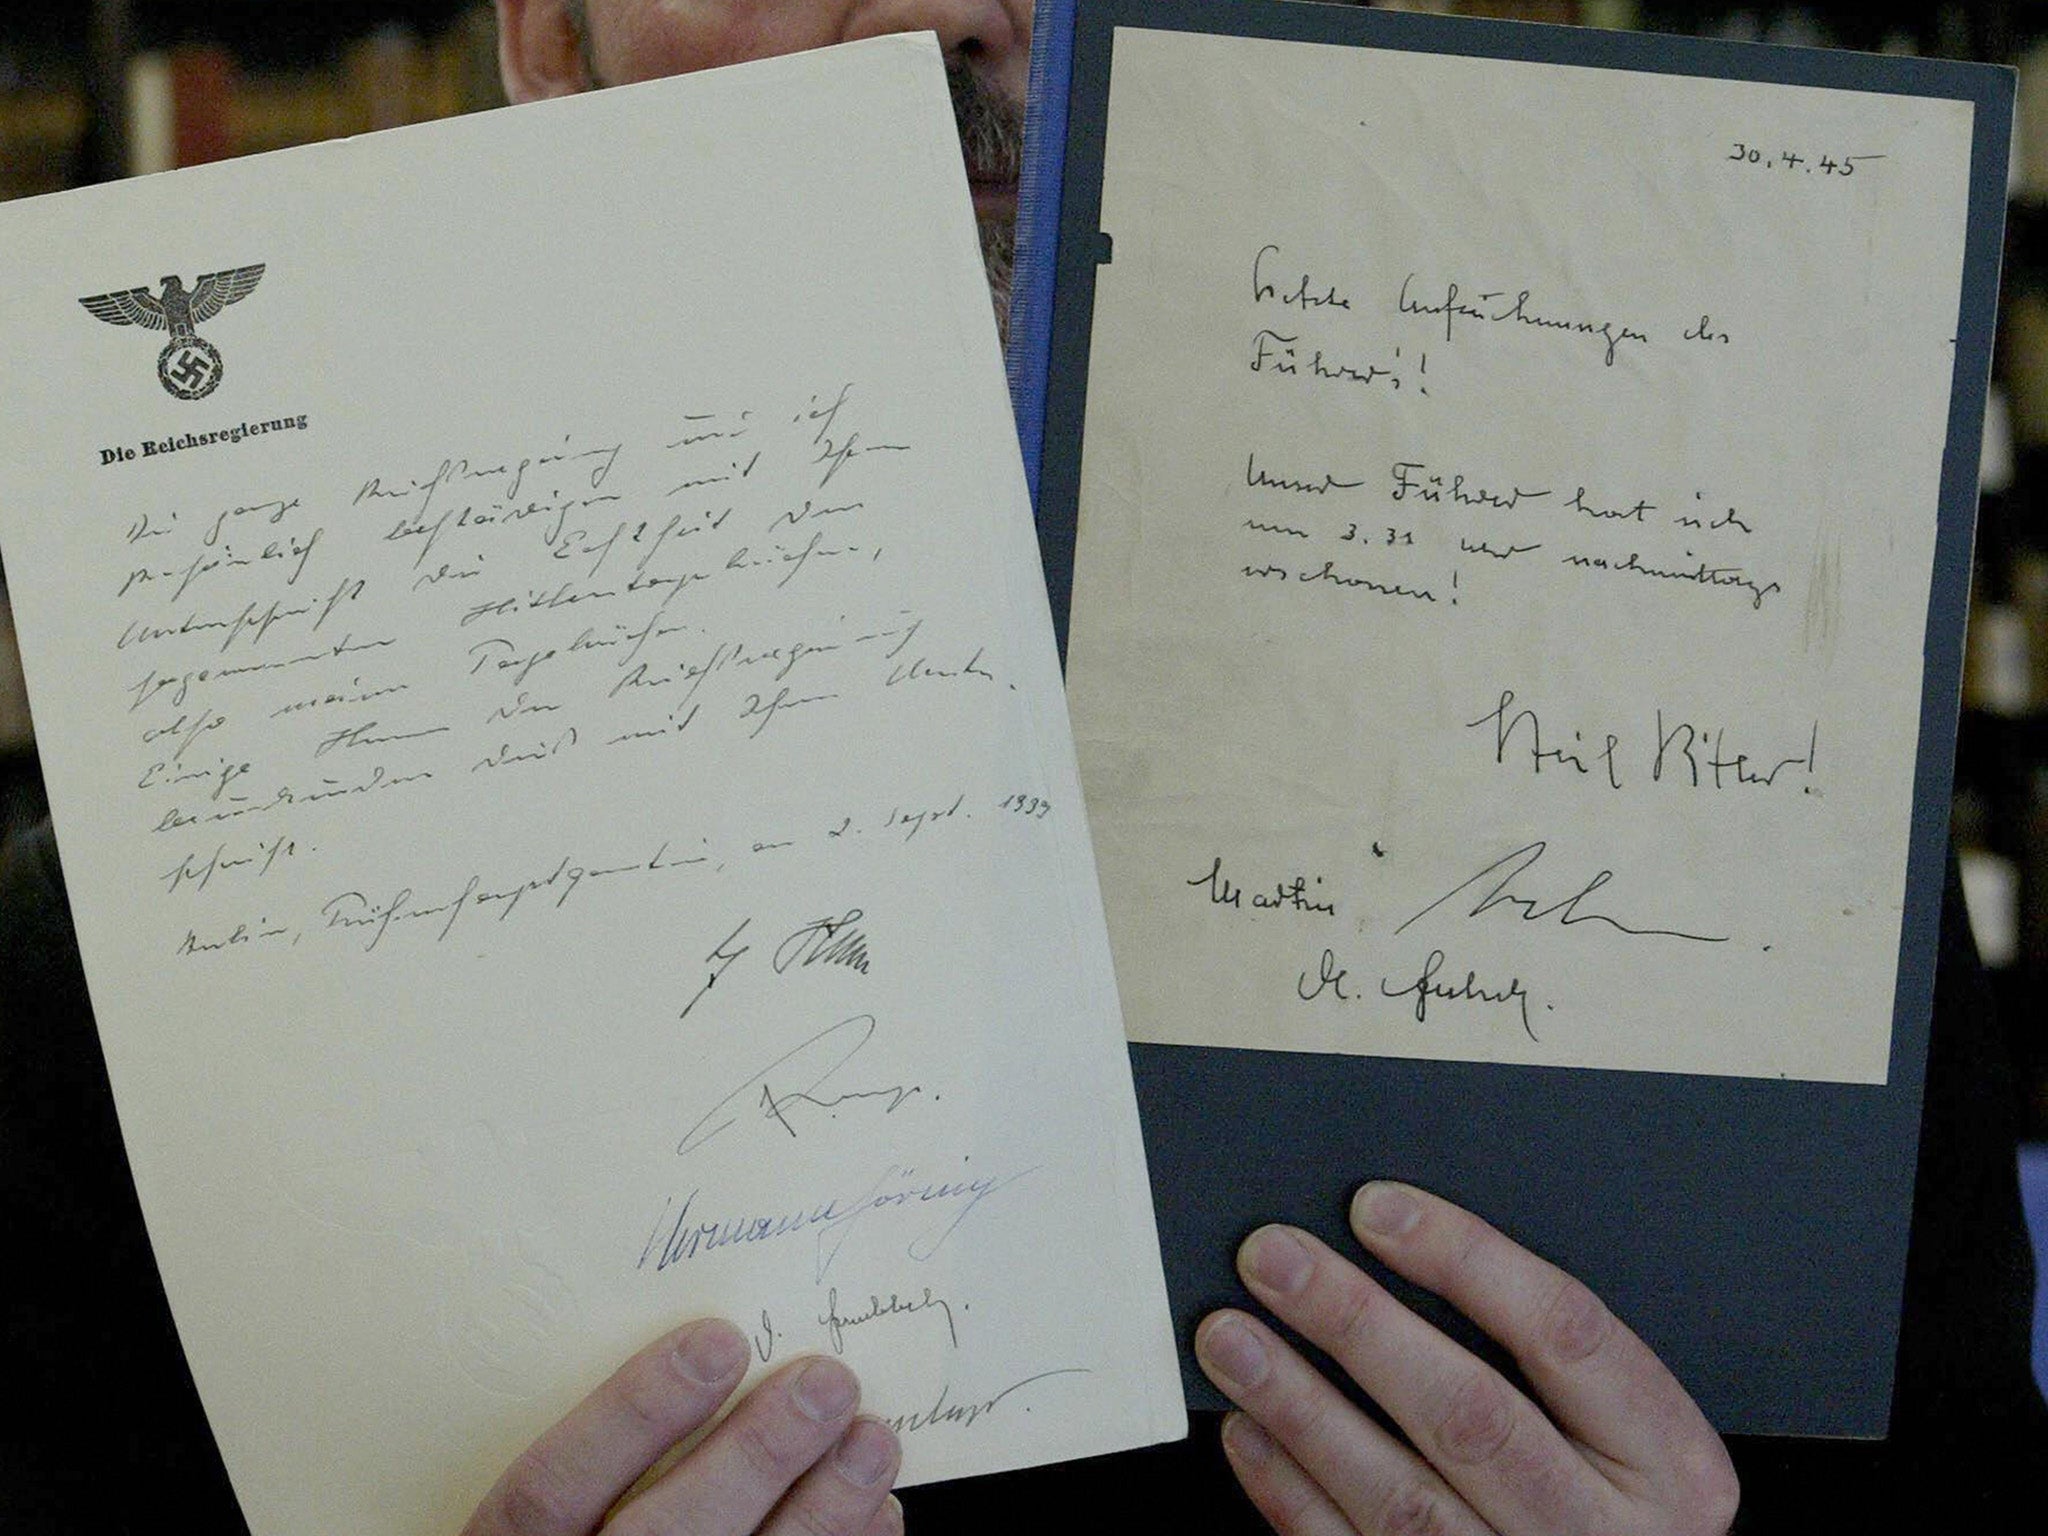 The last circulating copy of the Hitler Diaries by the late forger Konrad Kujau, sold at auction in Berlin in 2004